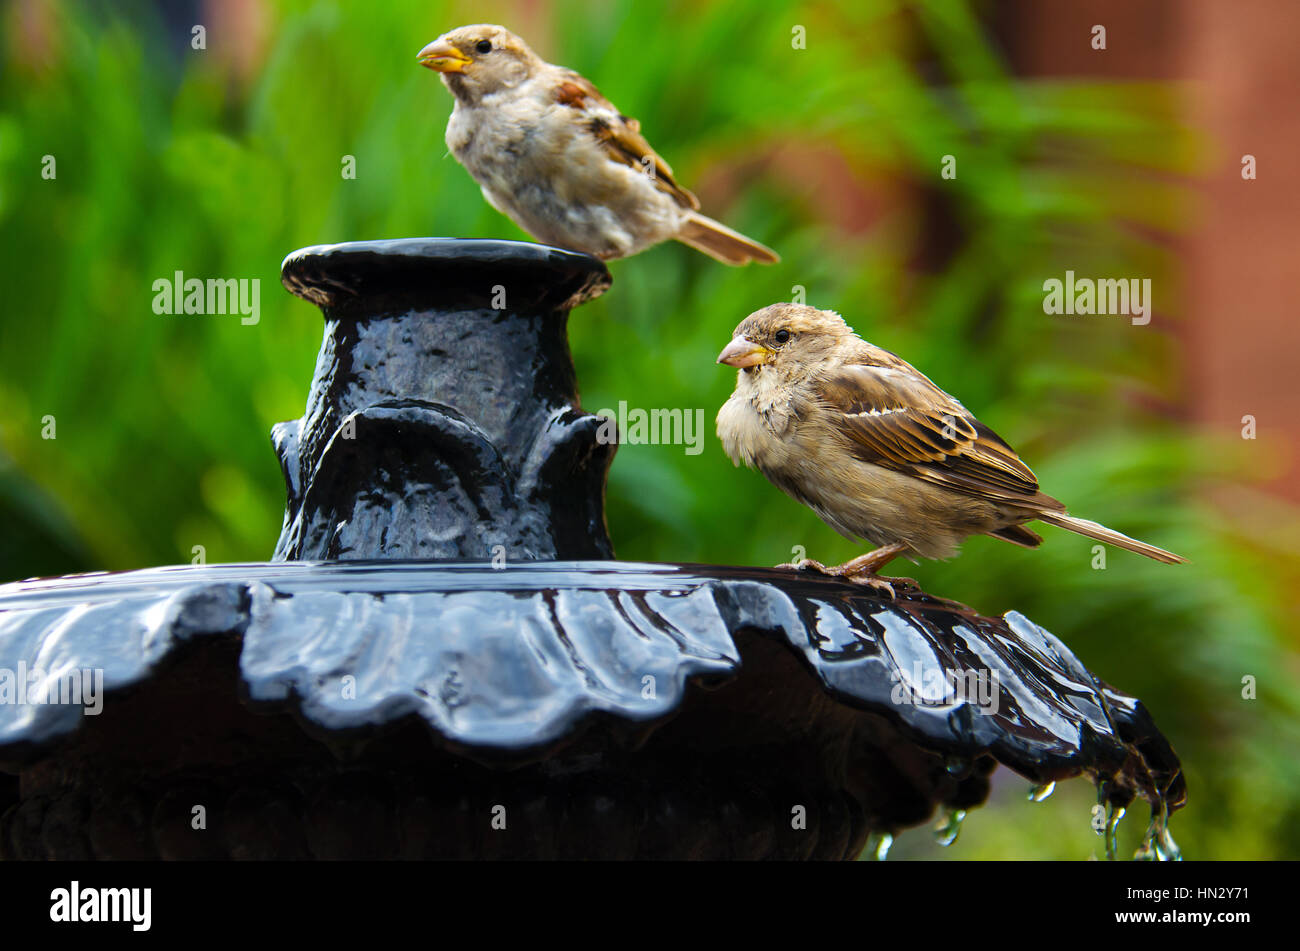 Two sparrows on a fountain drinking and bathing in water Stock Photo